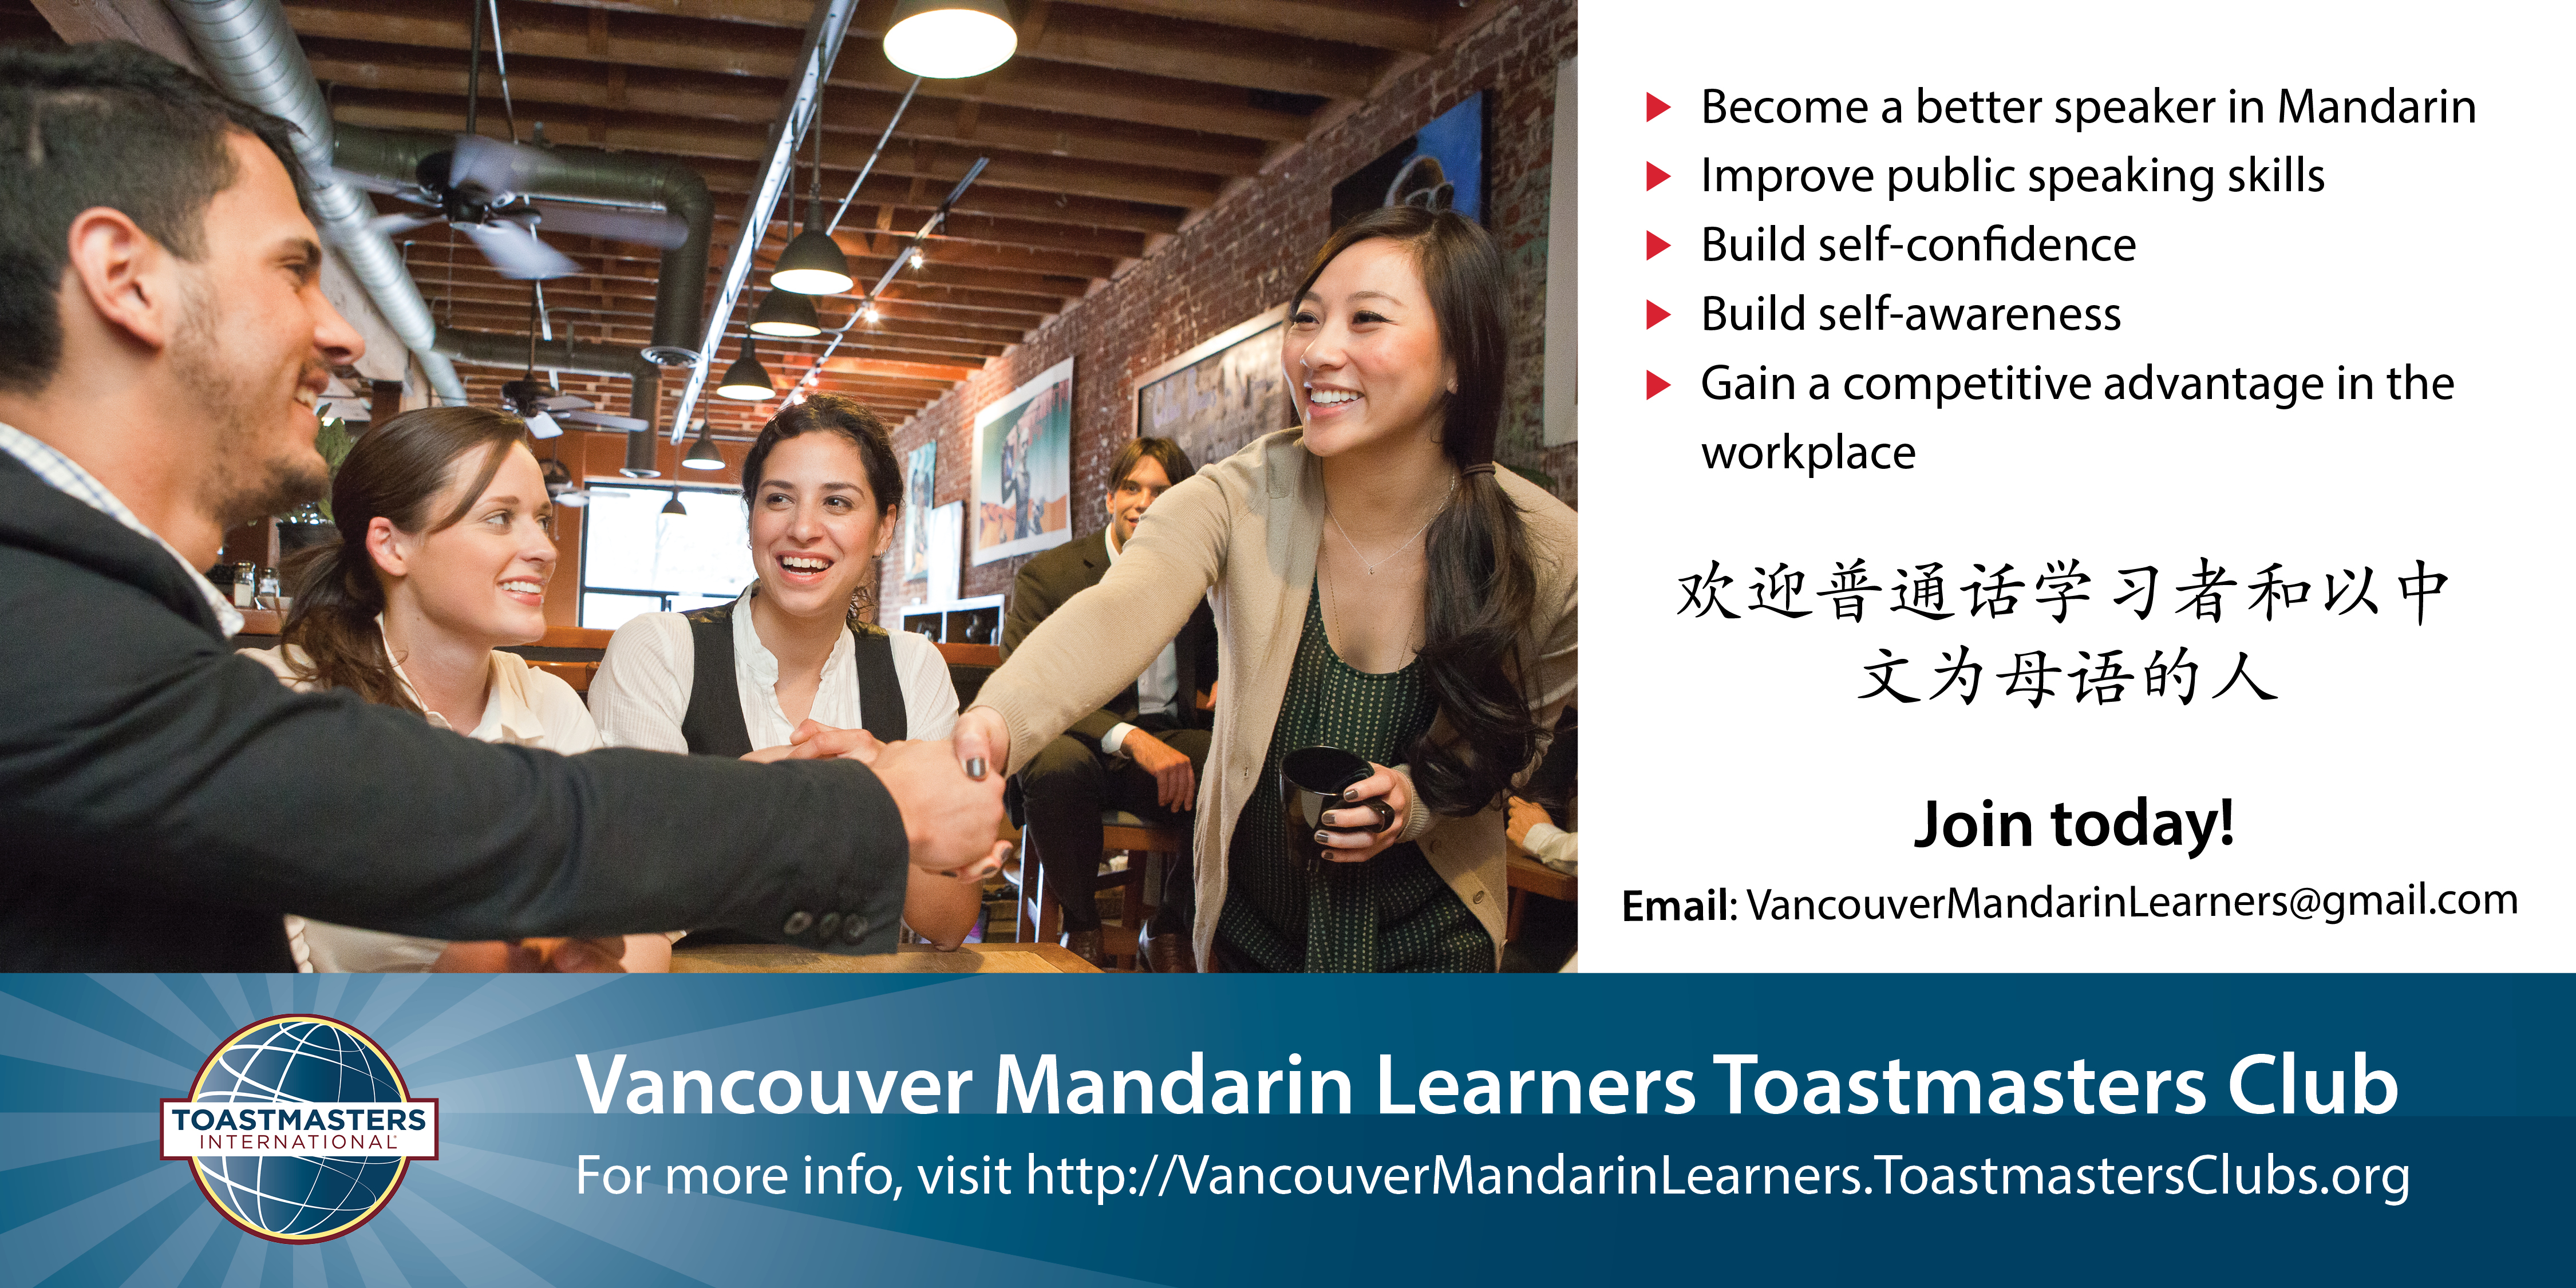 Join the Vancouver Mandarin Learners Toastmasters Club!